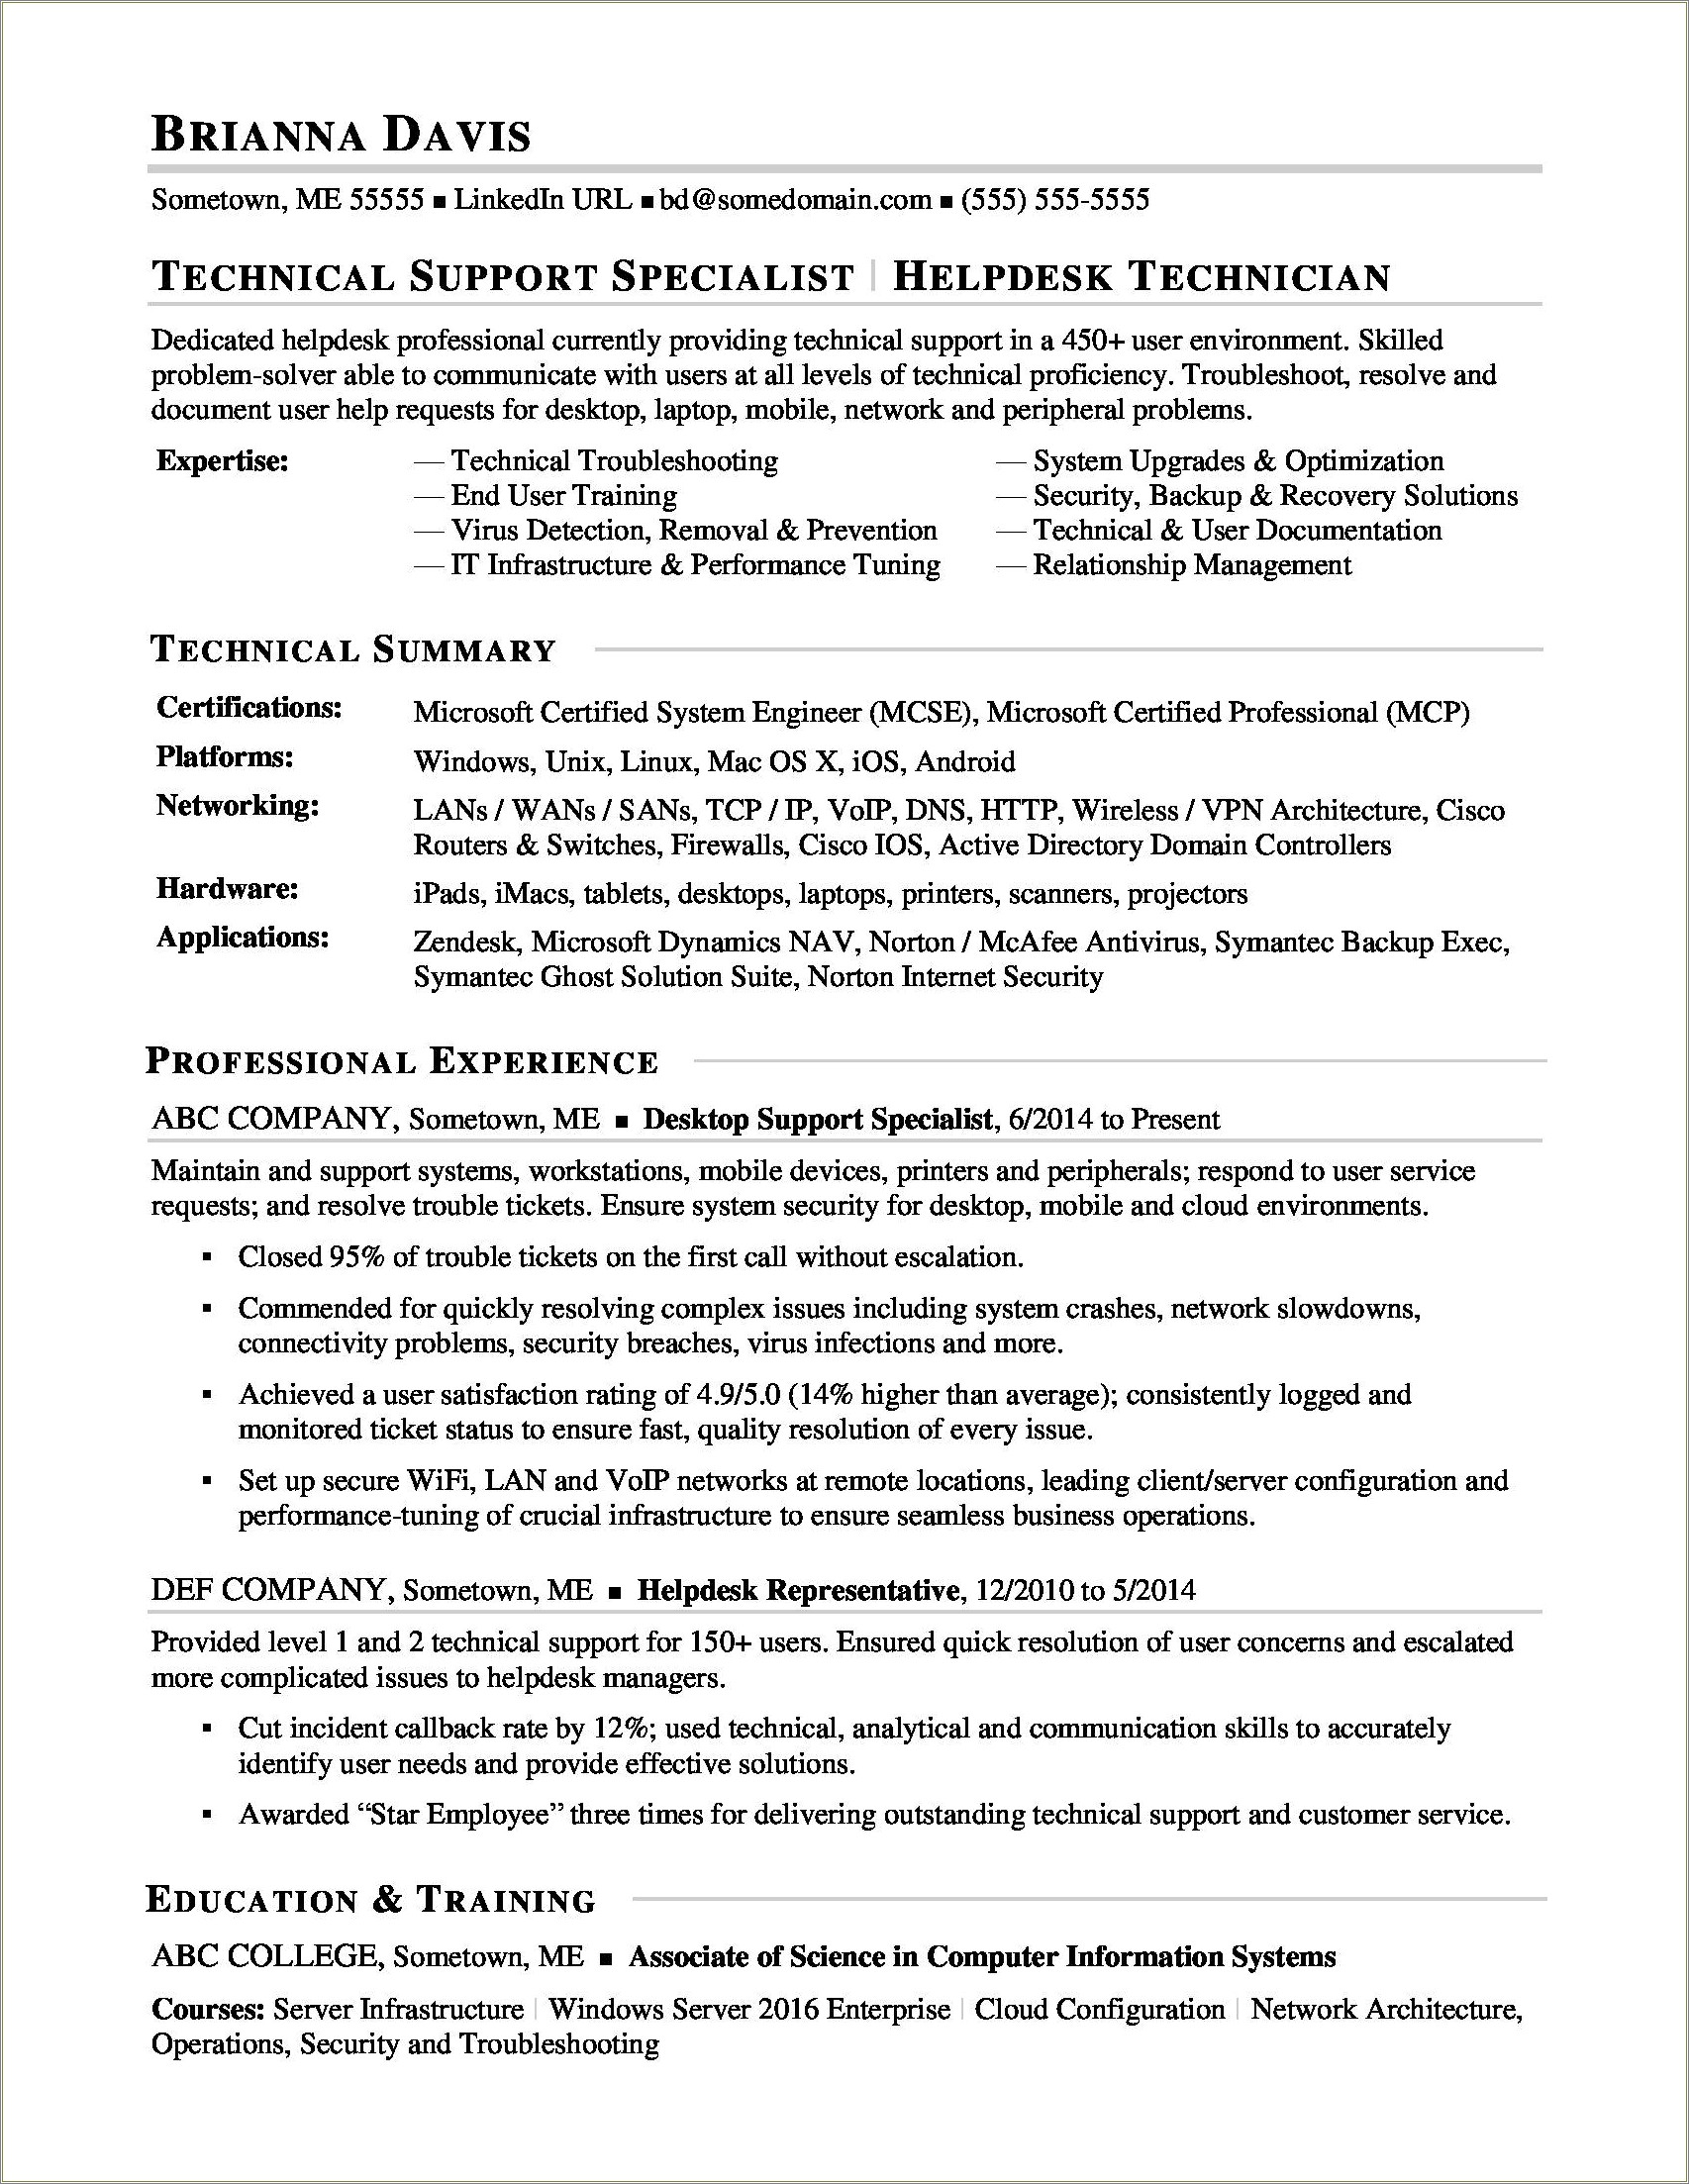 Best Summary For It Support Resume Examples